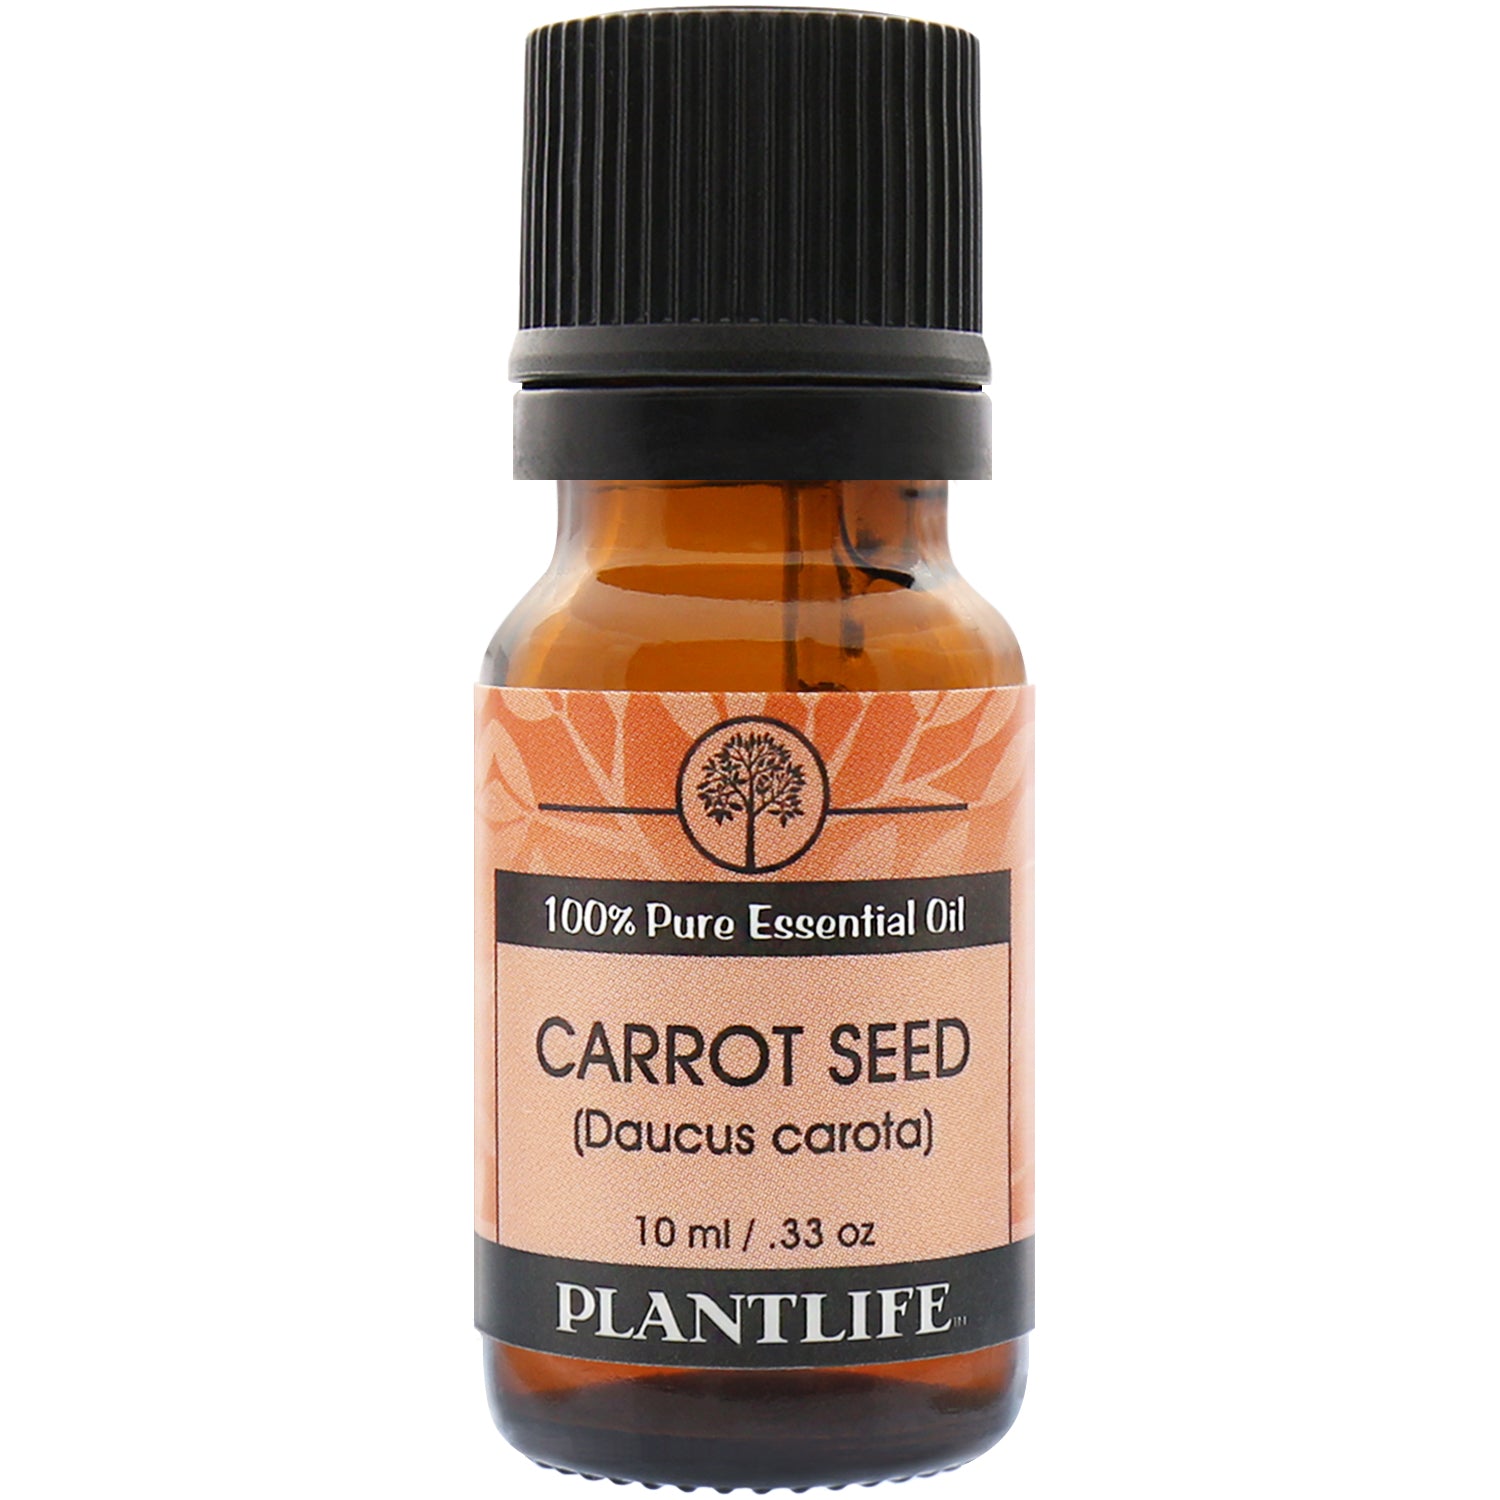 Buy Carrot Seed Oil Online at Best Price in USA